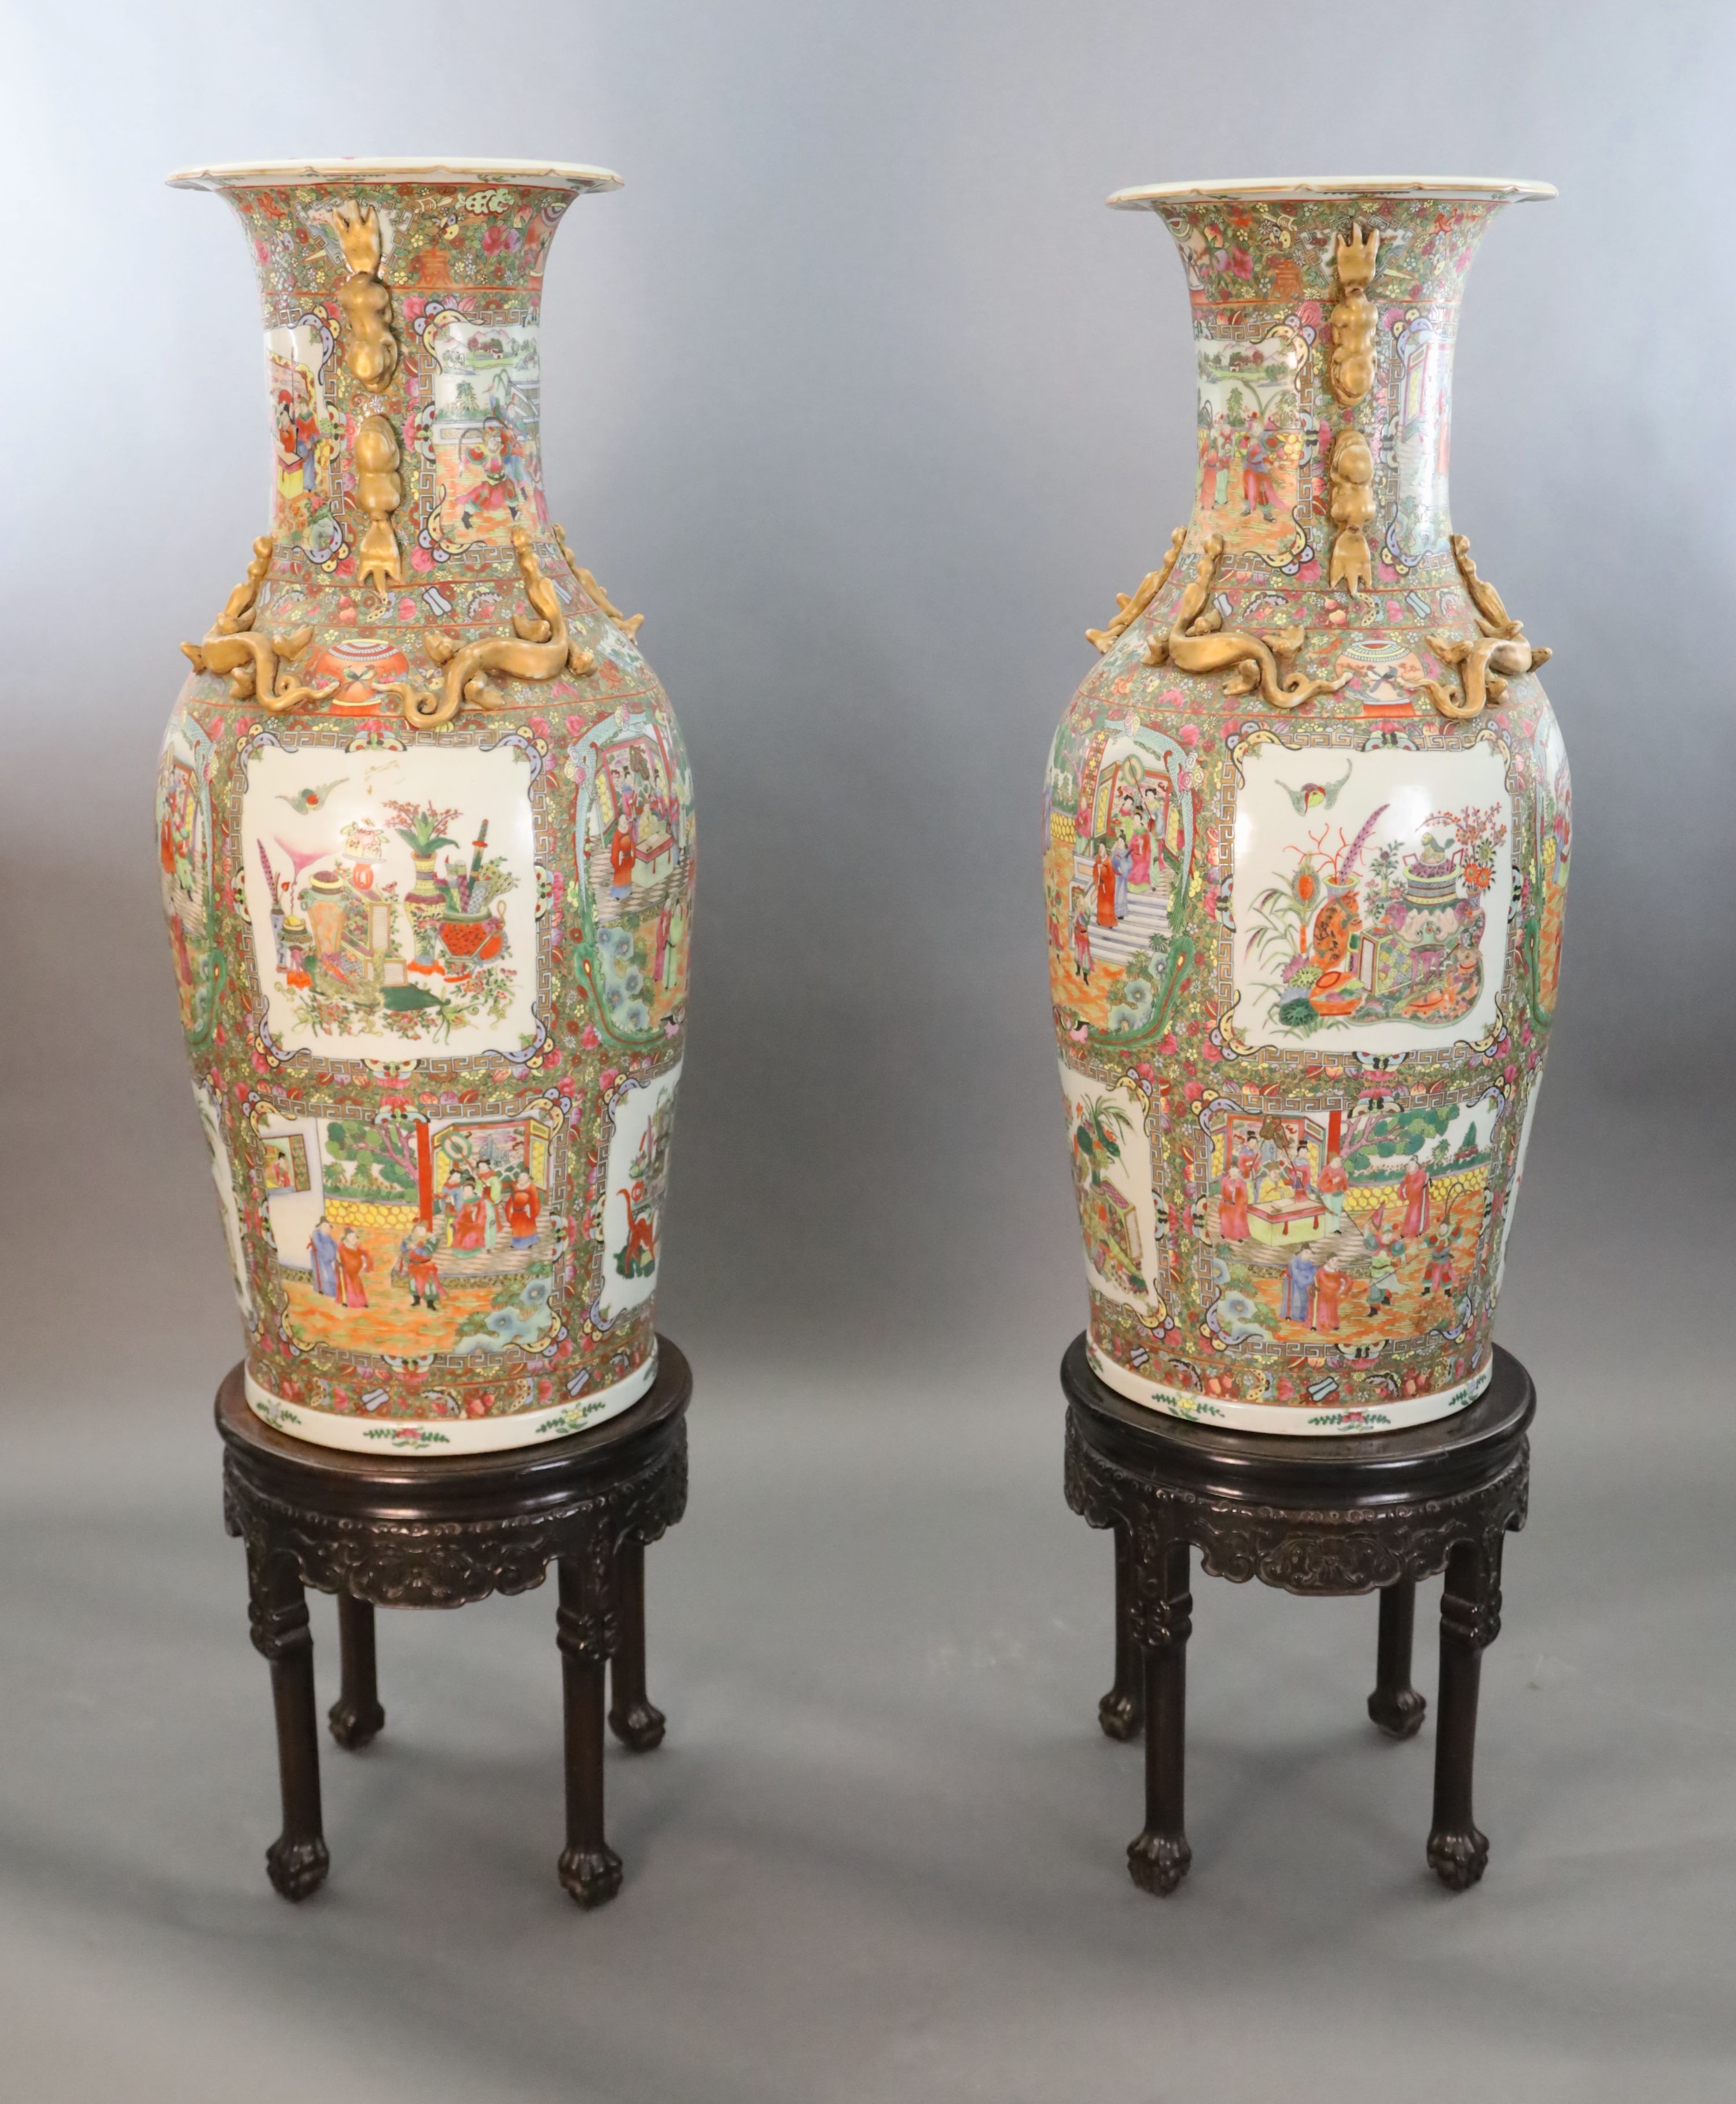 A pair of massive Chinese Canton style famille rose vases, 20th century and a pair of Chinese hongmu and marble stands, late 19th centu